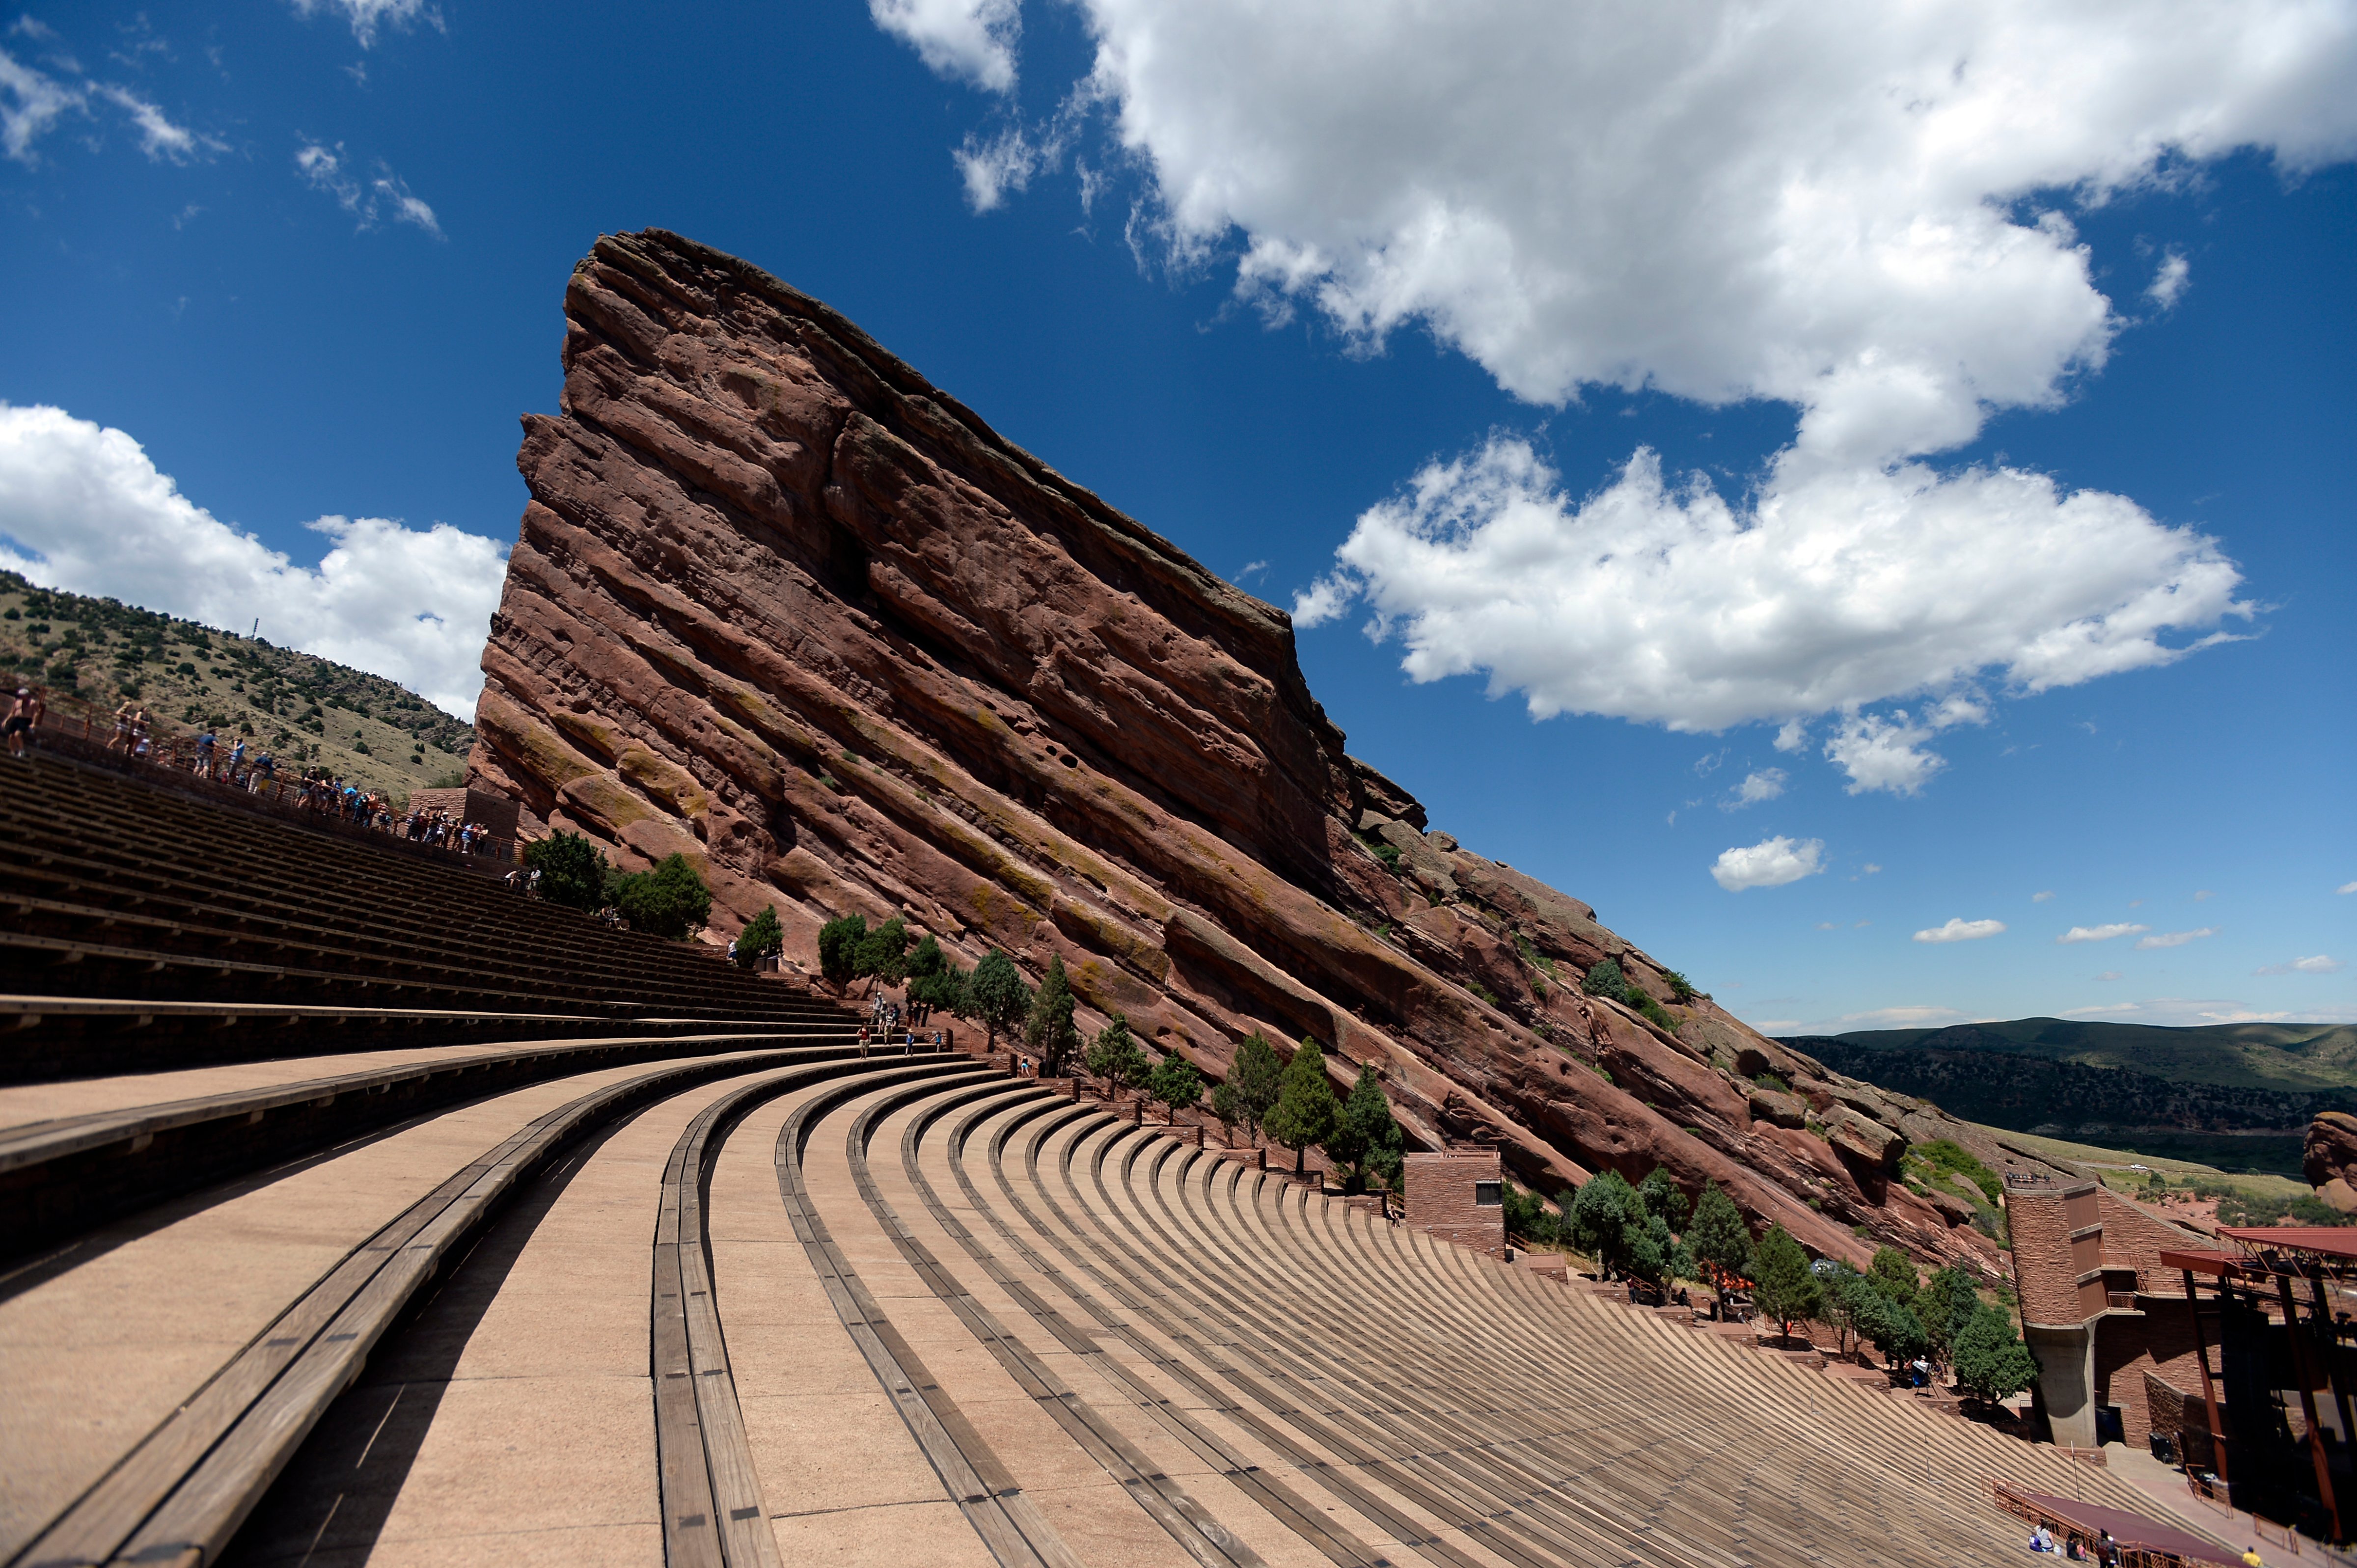 Visitors head to Red Rocks to get in a workout and to visit the rocks, Creation, Ship Rock and Stage Rock, on Aug 4, 2015, in Morrison, Colo. (John Leyba—The Denver Post via Getty Images)